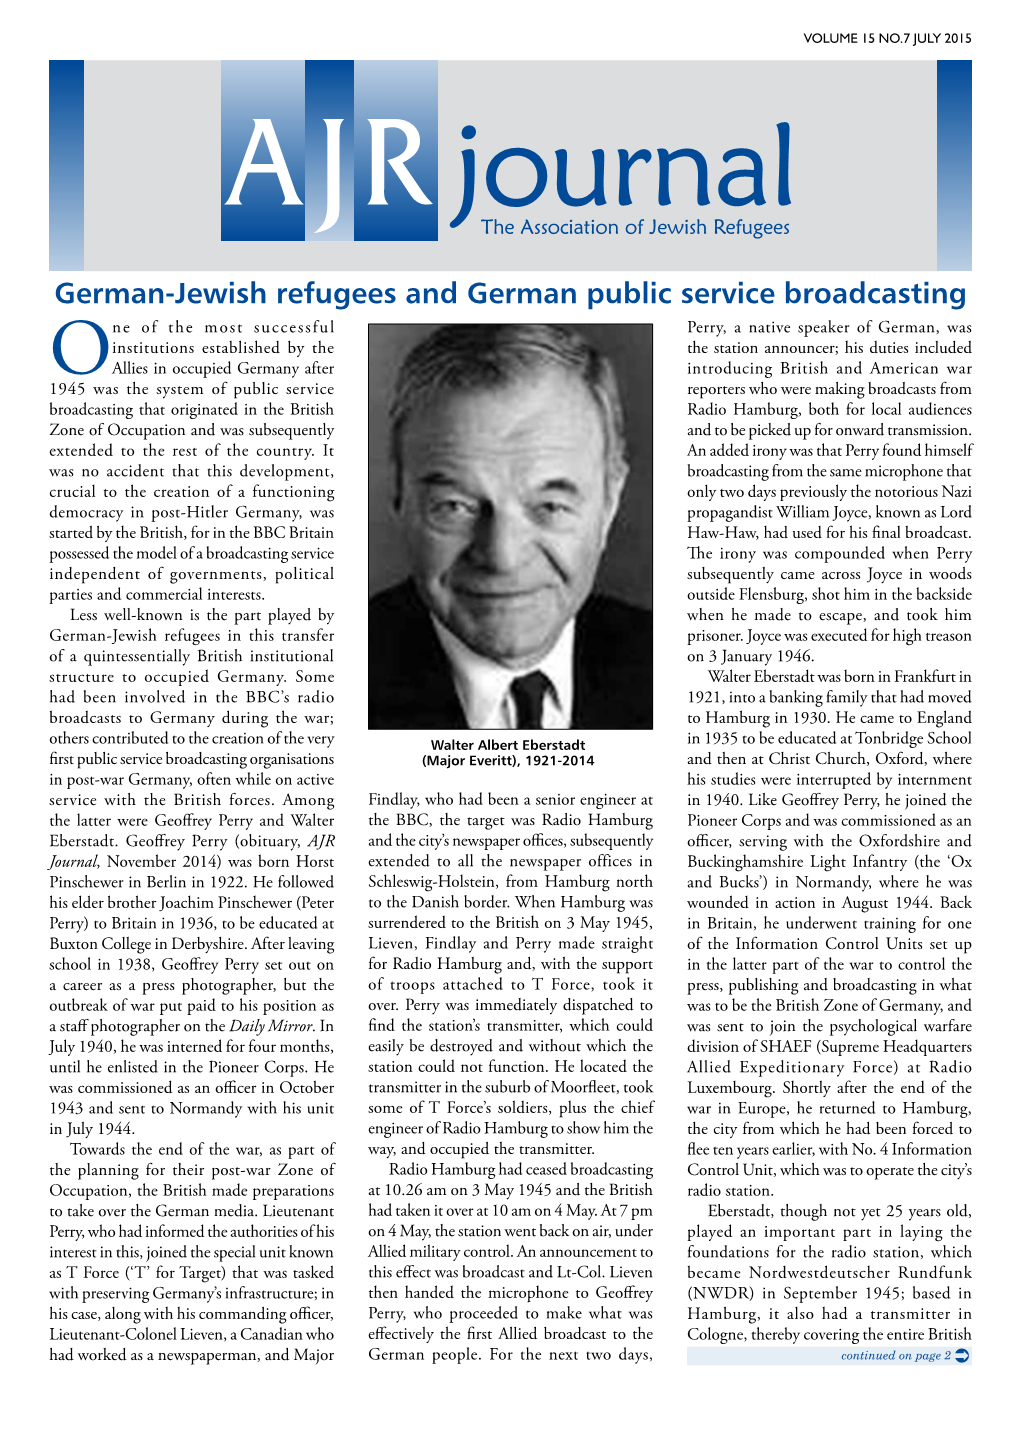 German-Jewish Refugees and German Public Service Broadcasting